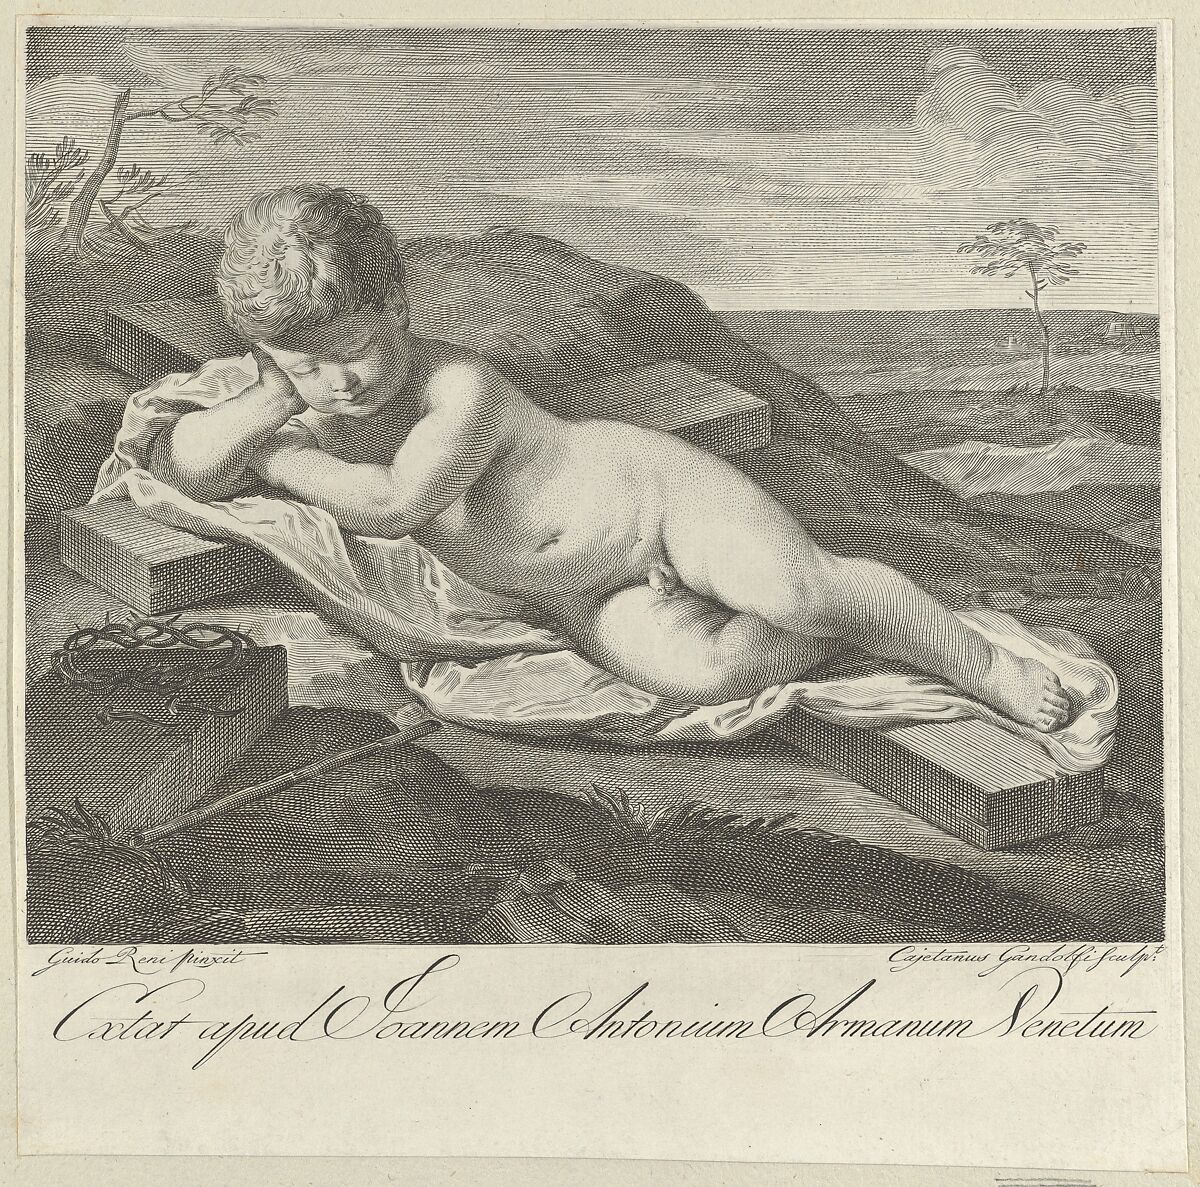 The Christ Child sleeping on a cross in a landscape, crown of thorns in the foreground, after Reni, Engraved by Gaetano Gandolfi (Italian, San Matteo della Decima 1734–1802 Bologna), Engraving 